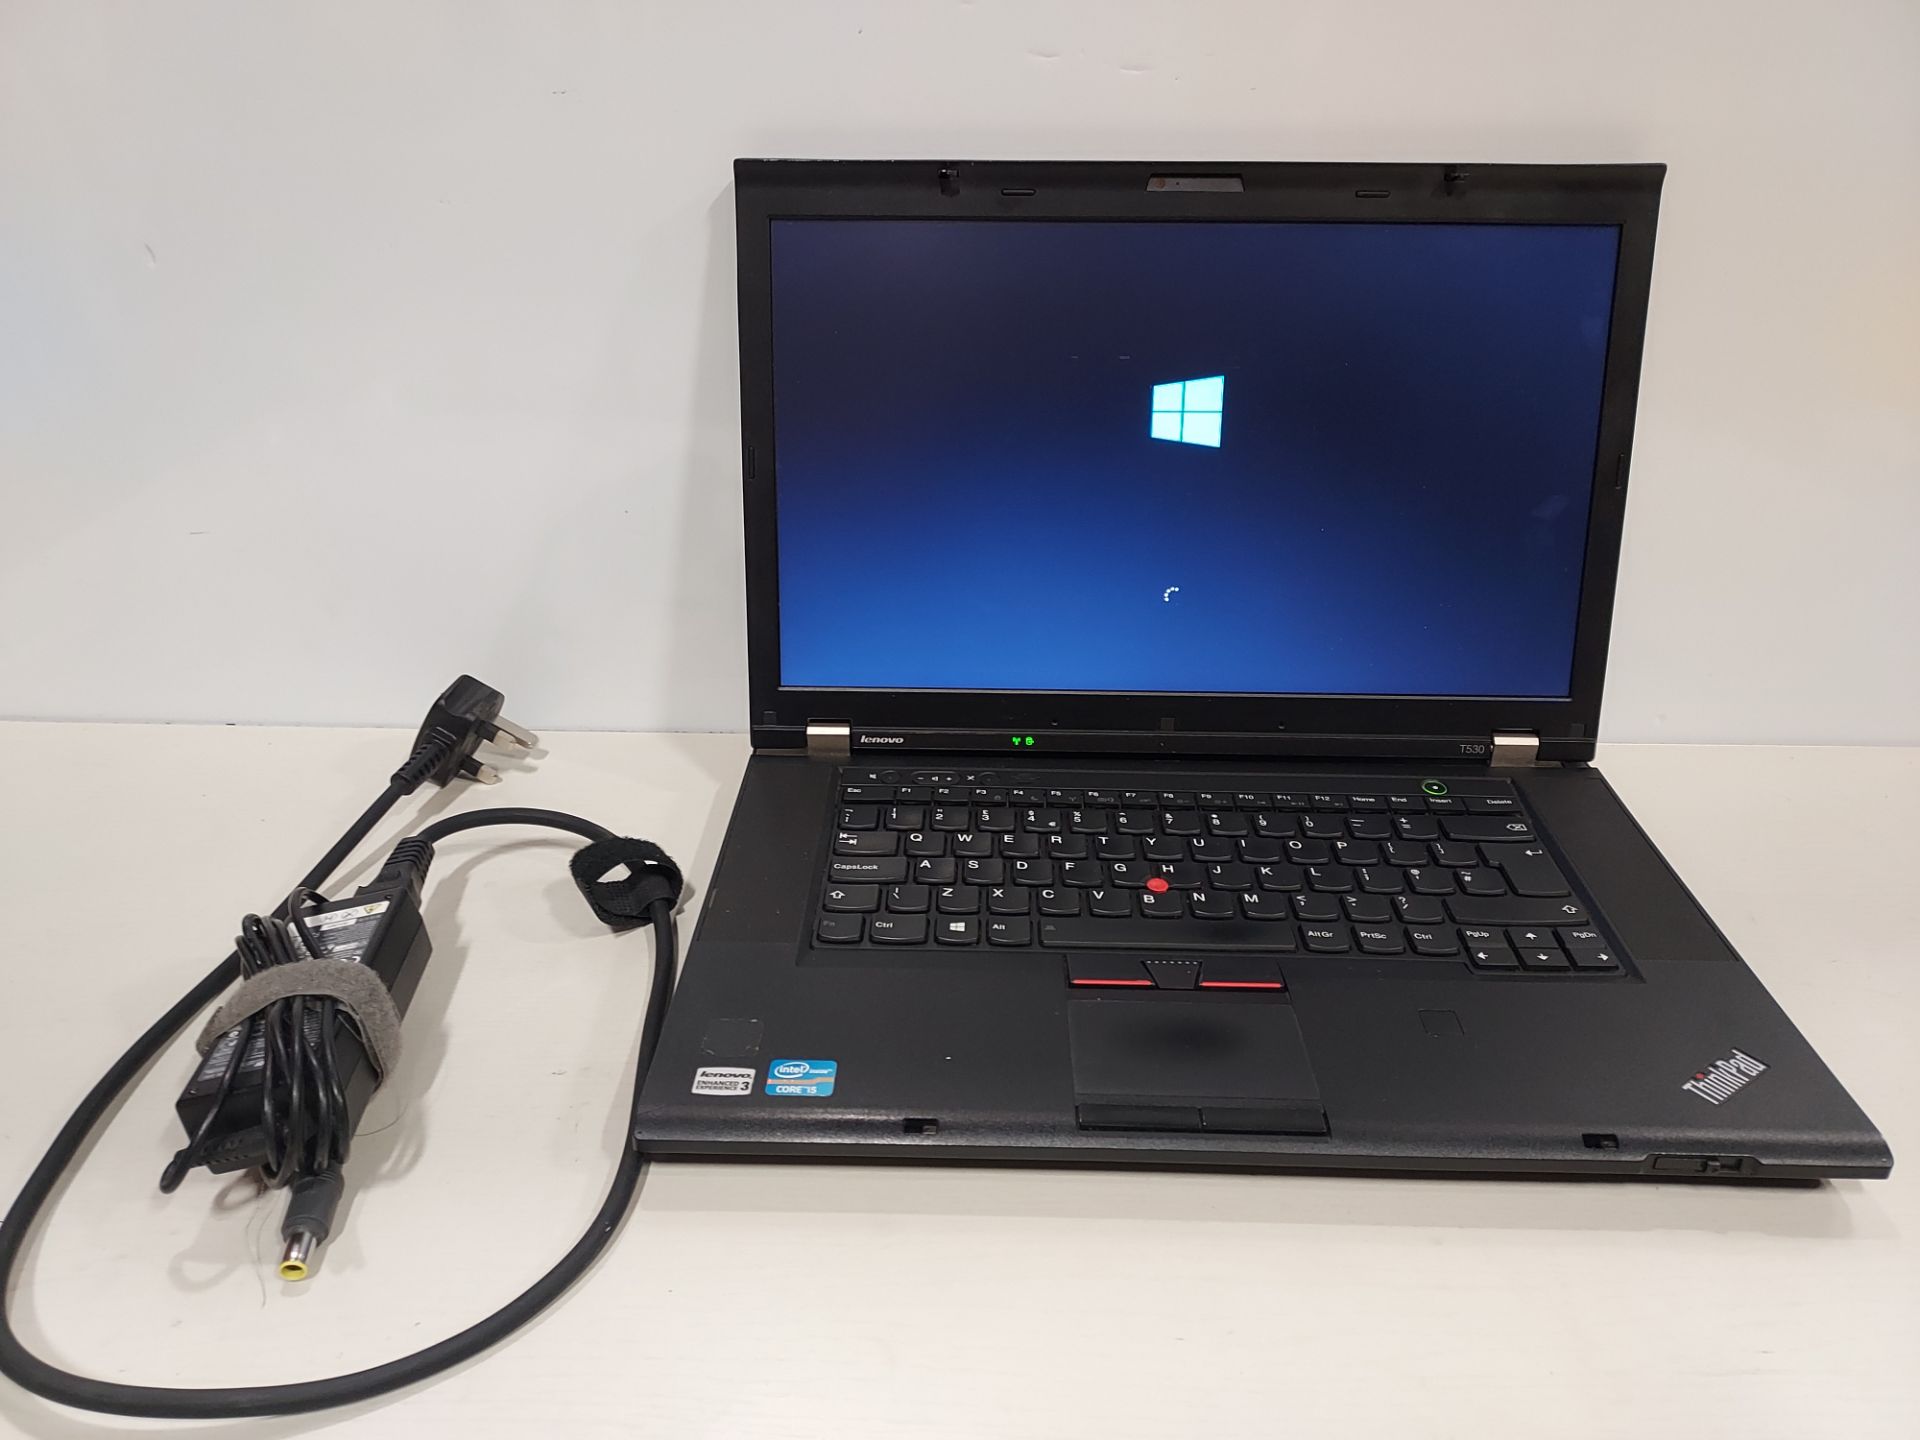 1 X LENOVO T530 - WITH WINDOWS 10 - DATA WIPED - WITH CHARGER